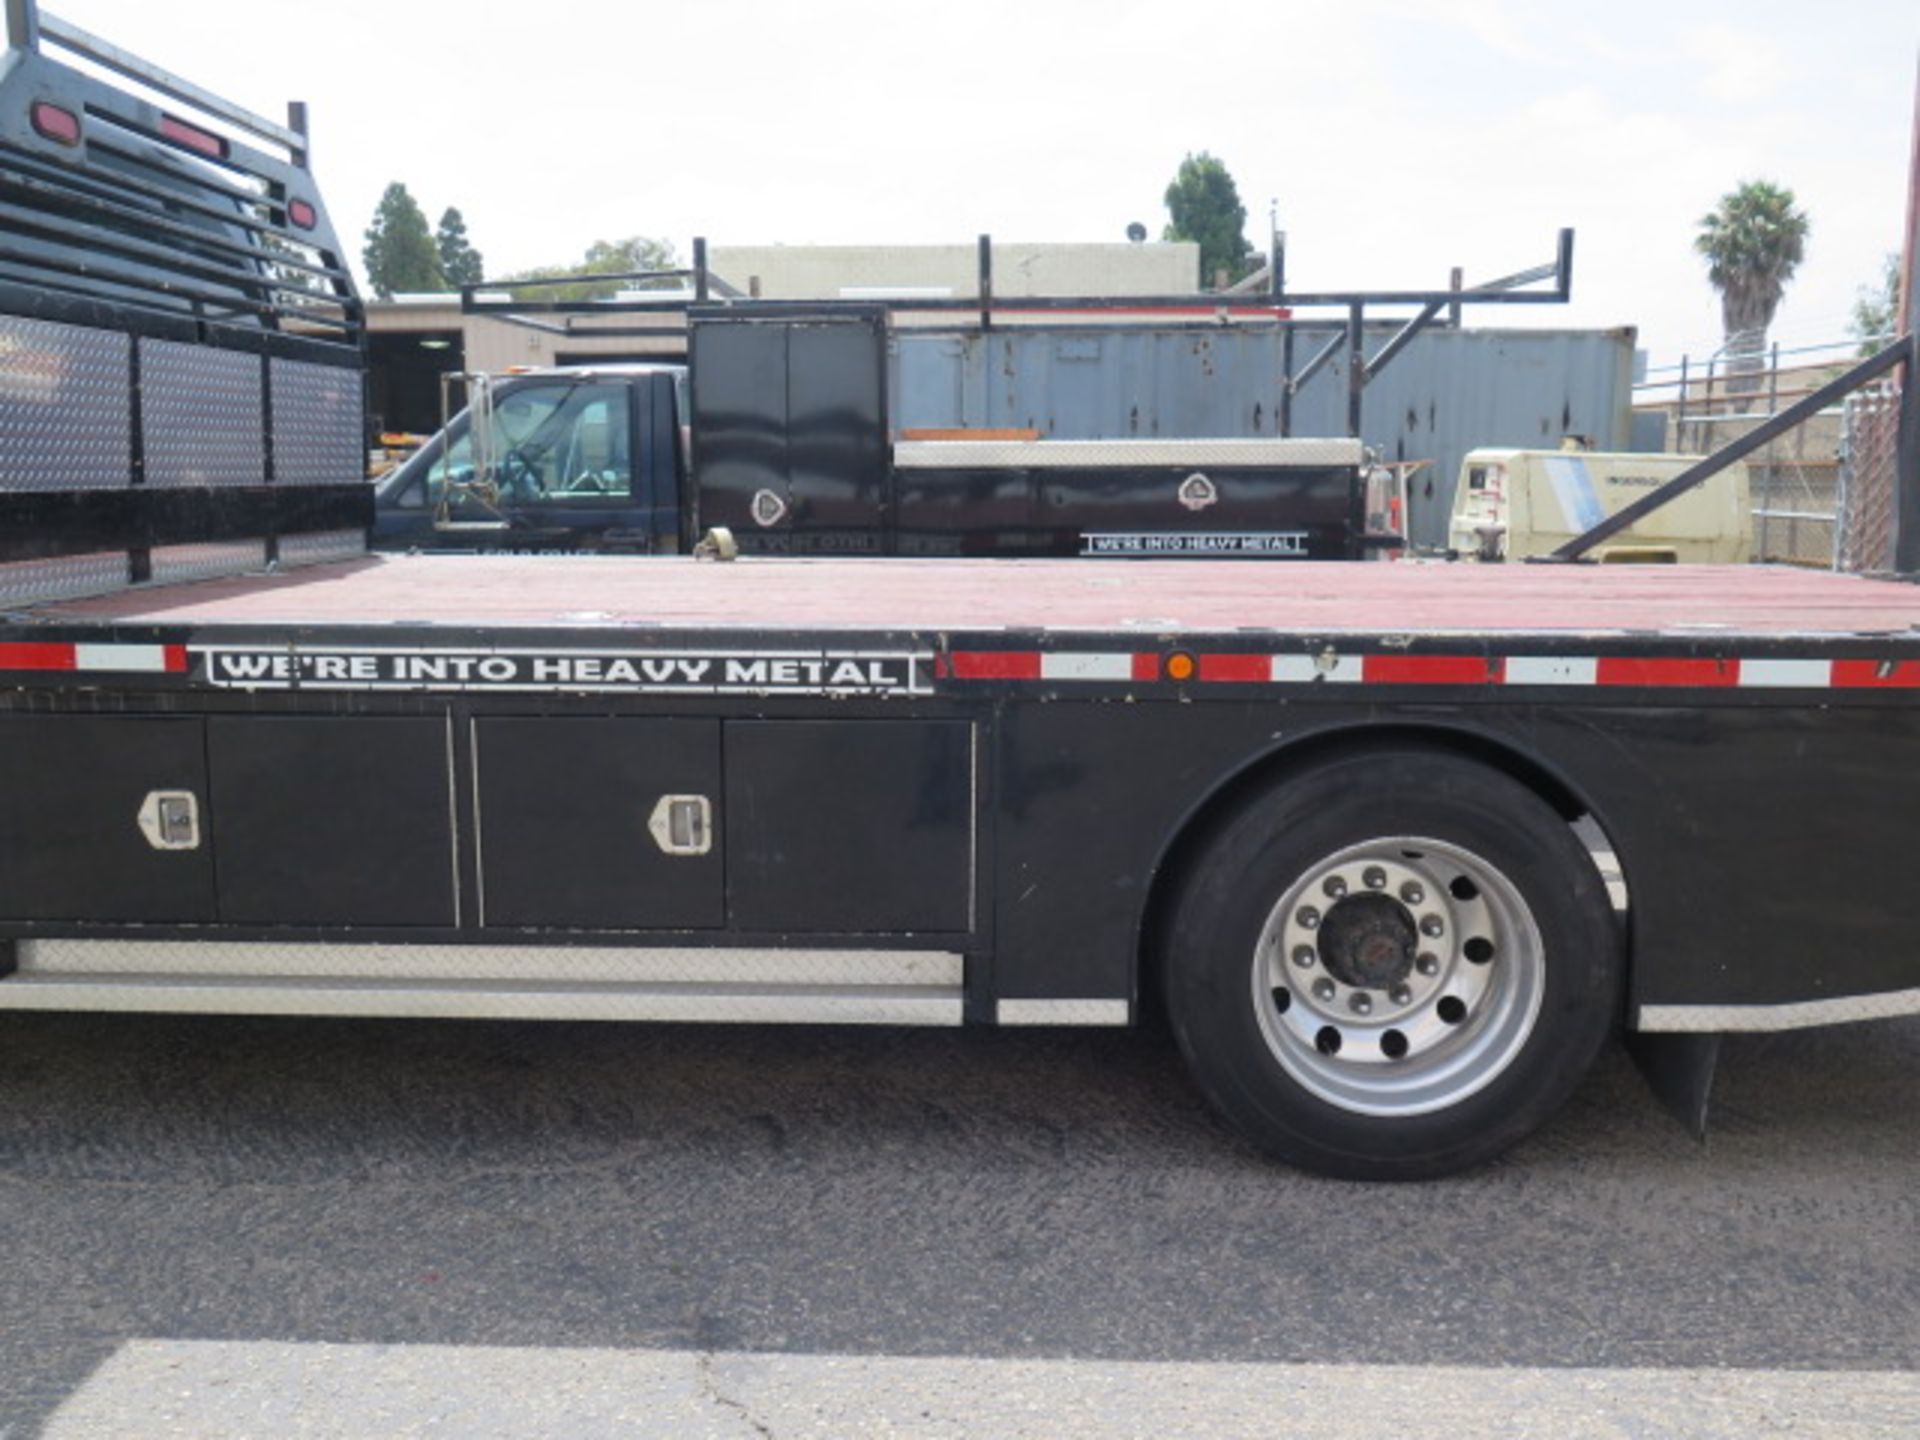 1998 GMC C5500 15’ Flatbed Truck Lisc# 7X17465 w/ 6.0L LPG Engine, 5-Speed Manual Trans, 26,000 - Image 8 of 20